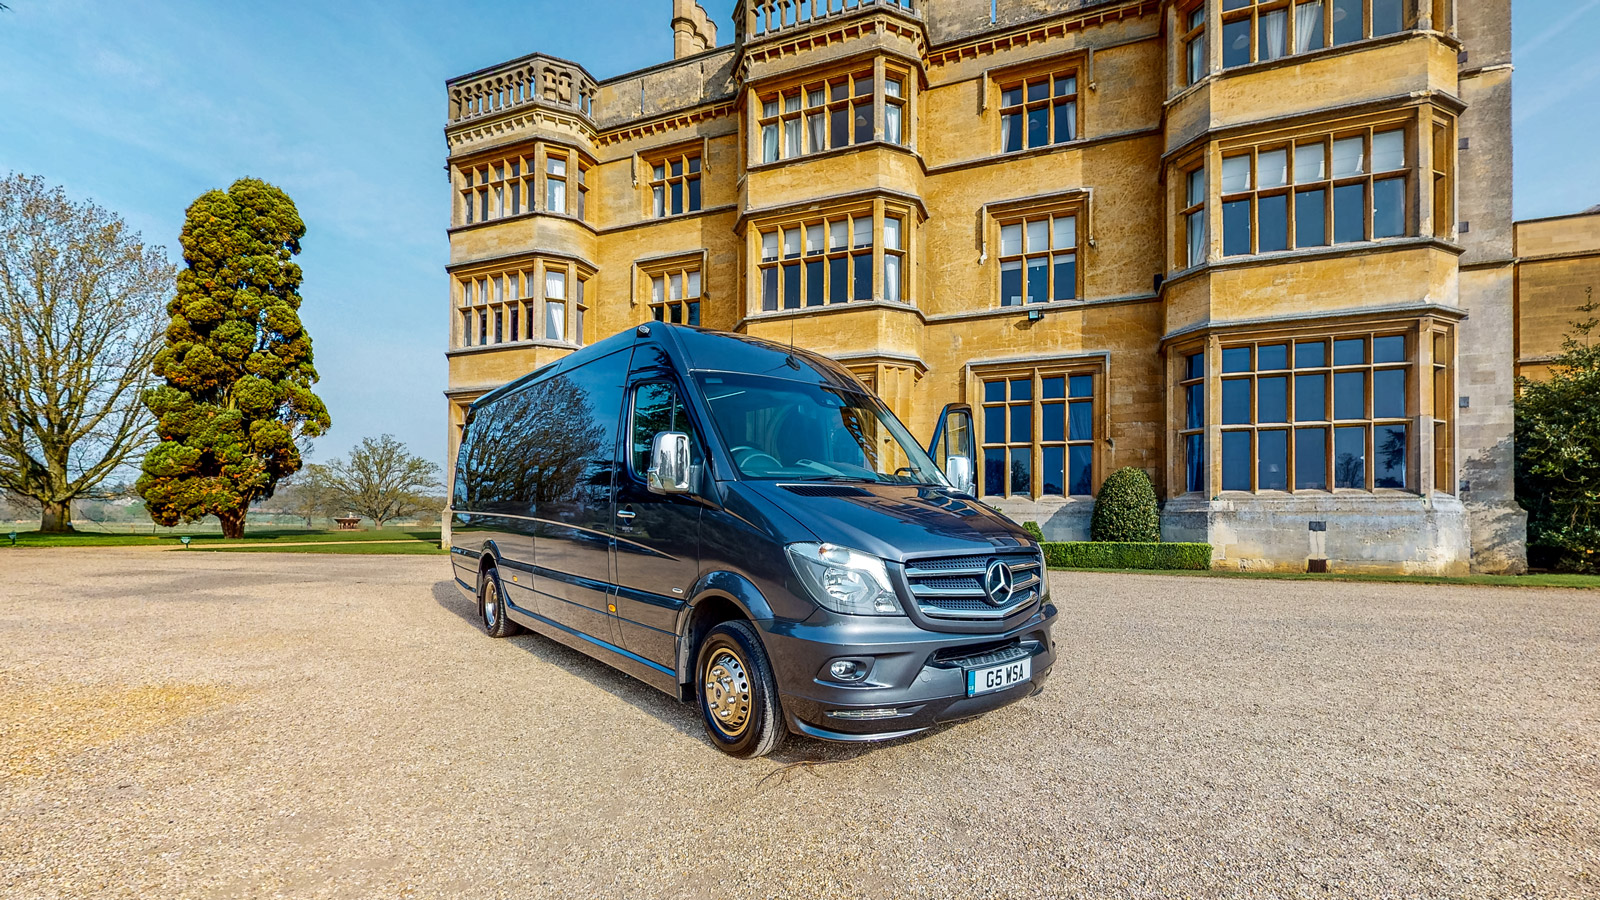 Luxury Minibus in grey outside a stately home